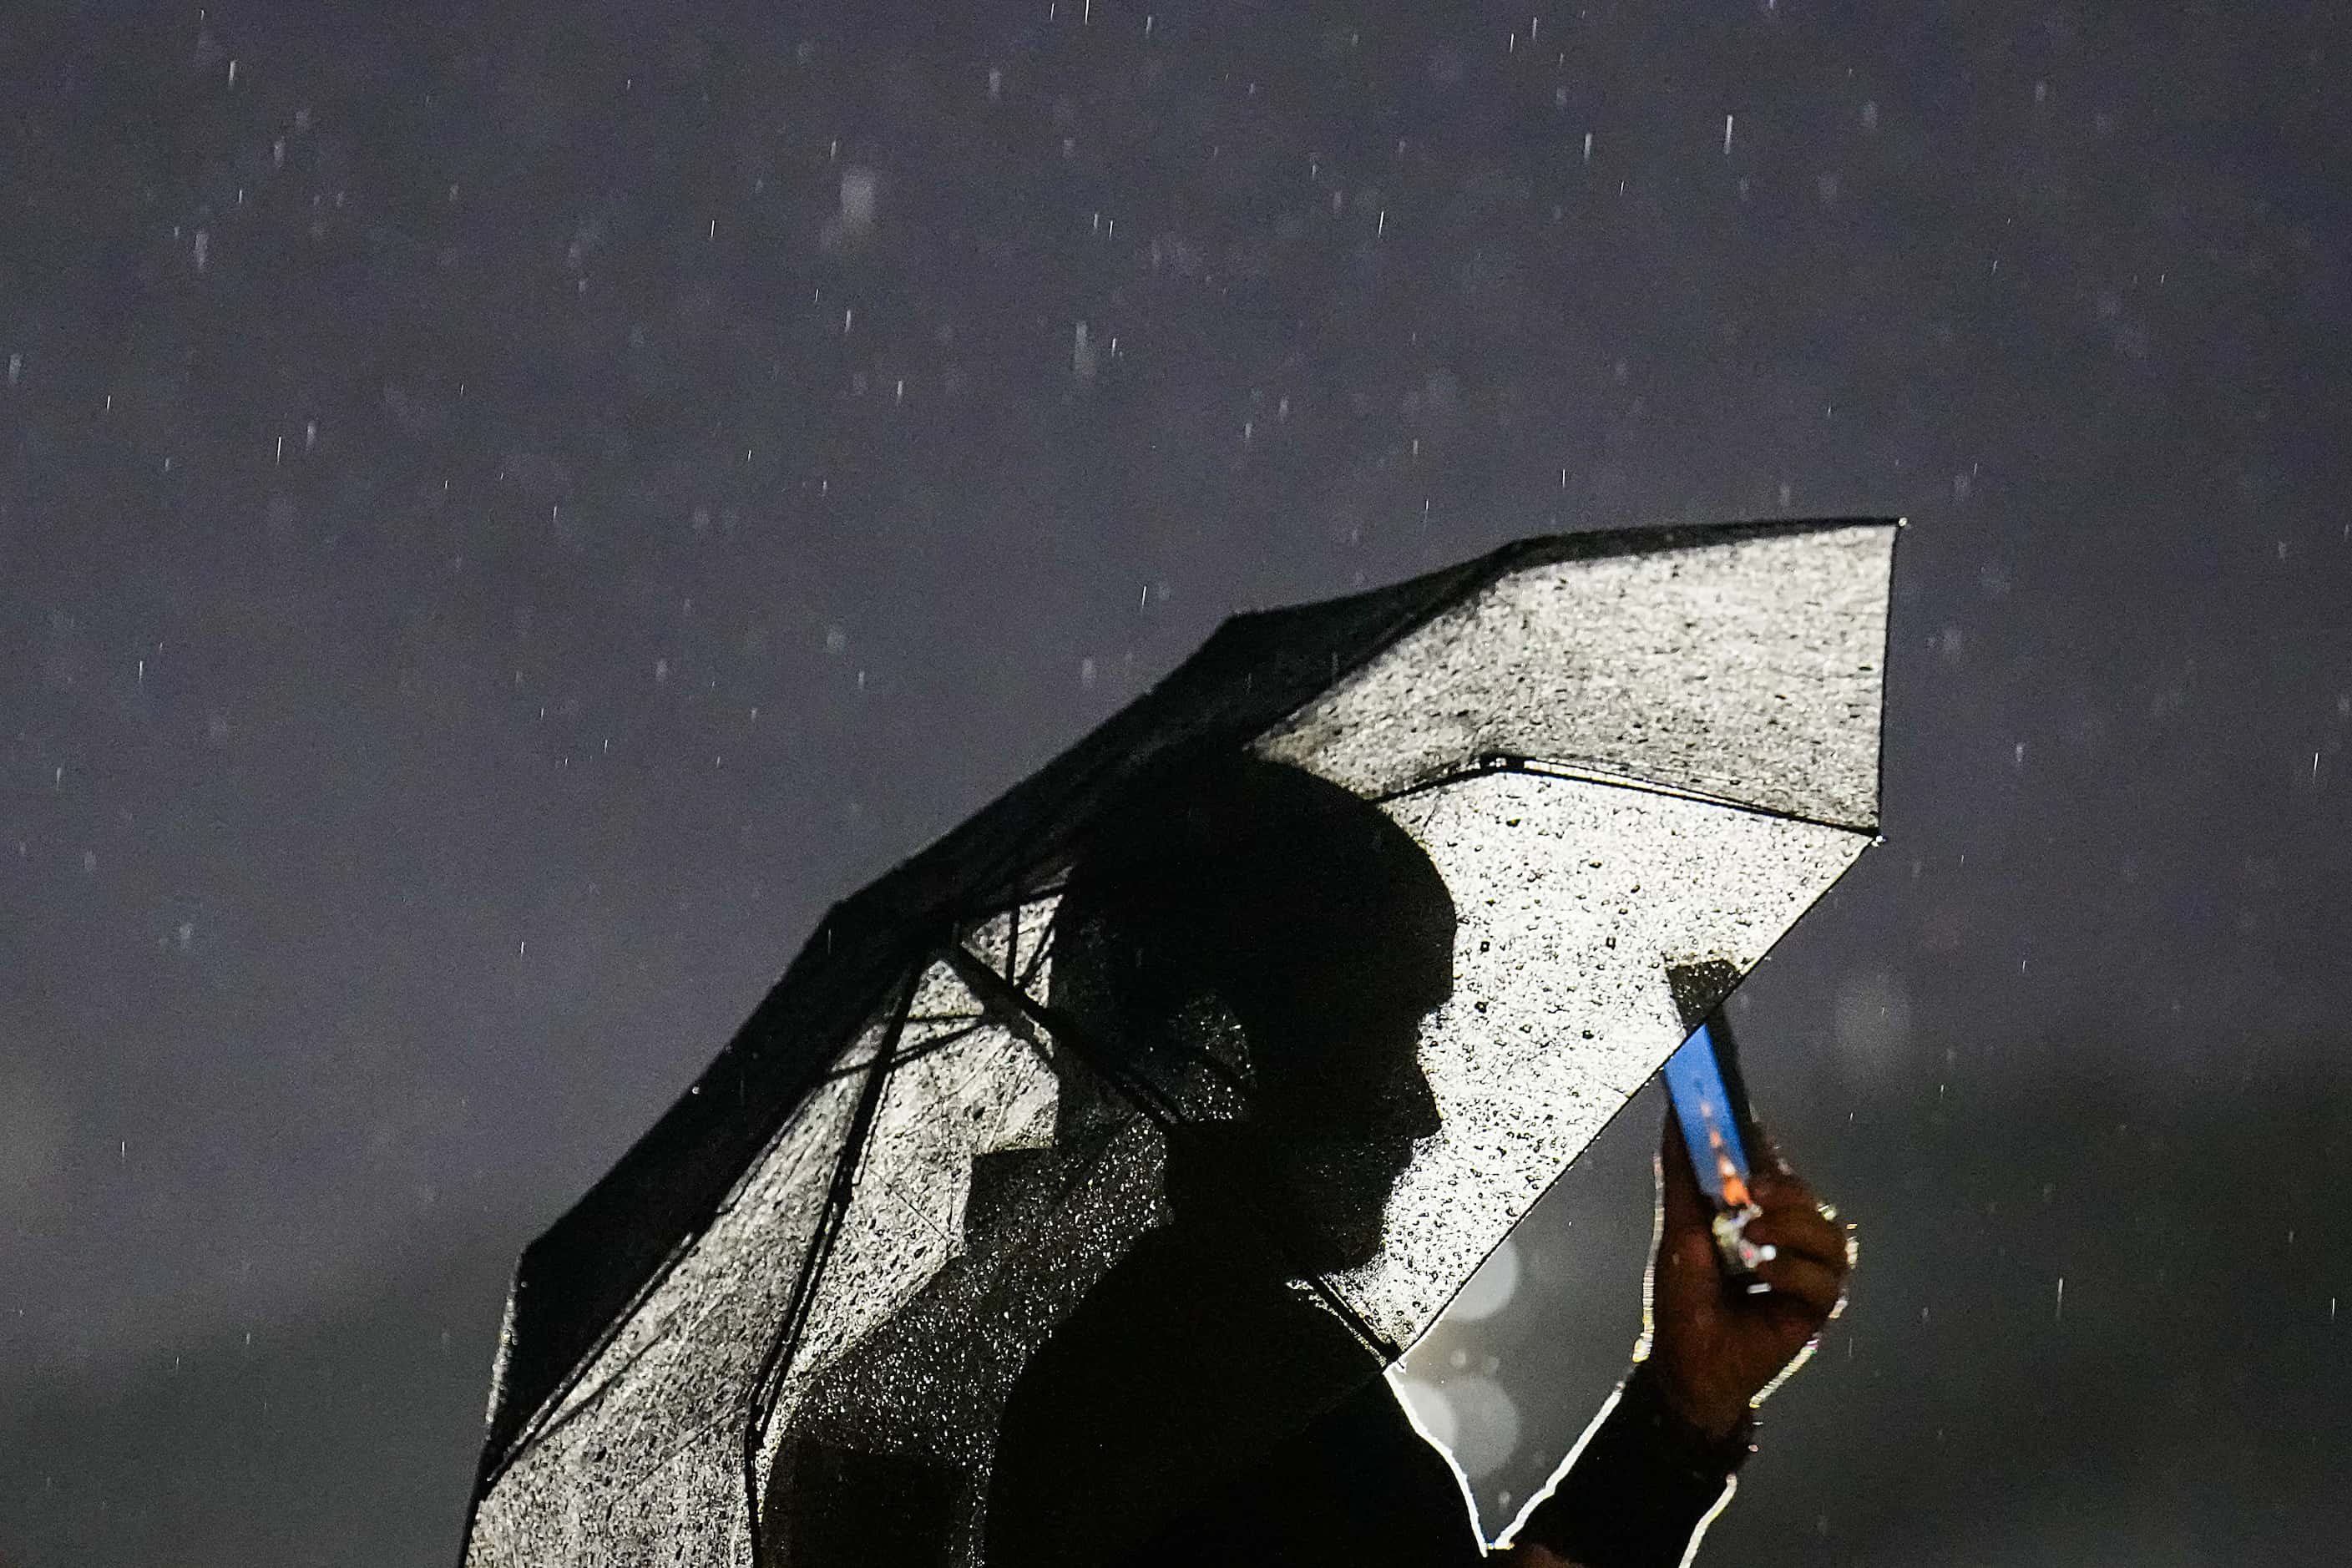 A spectator watches along the Seine from under an umbrella during opening ceremonies for the...